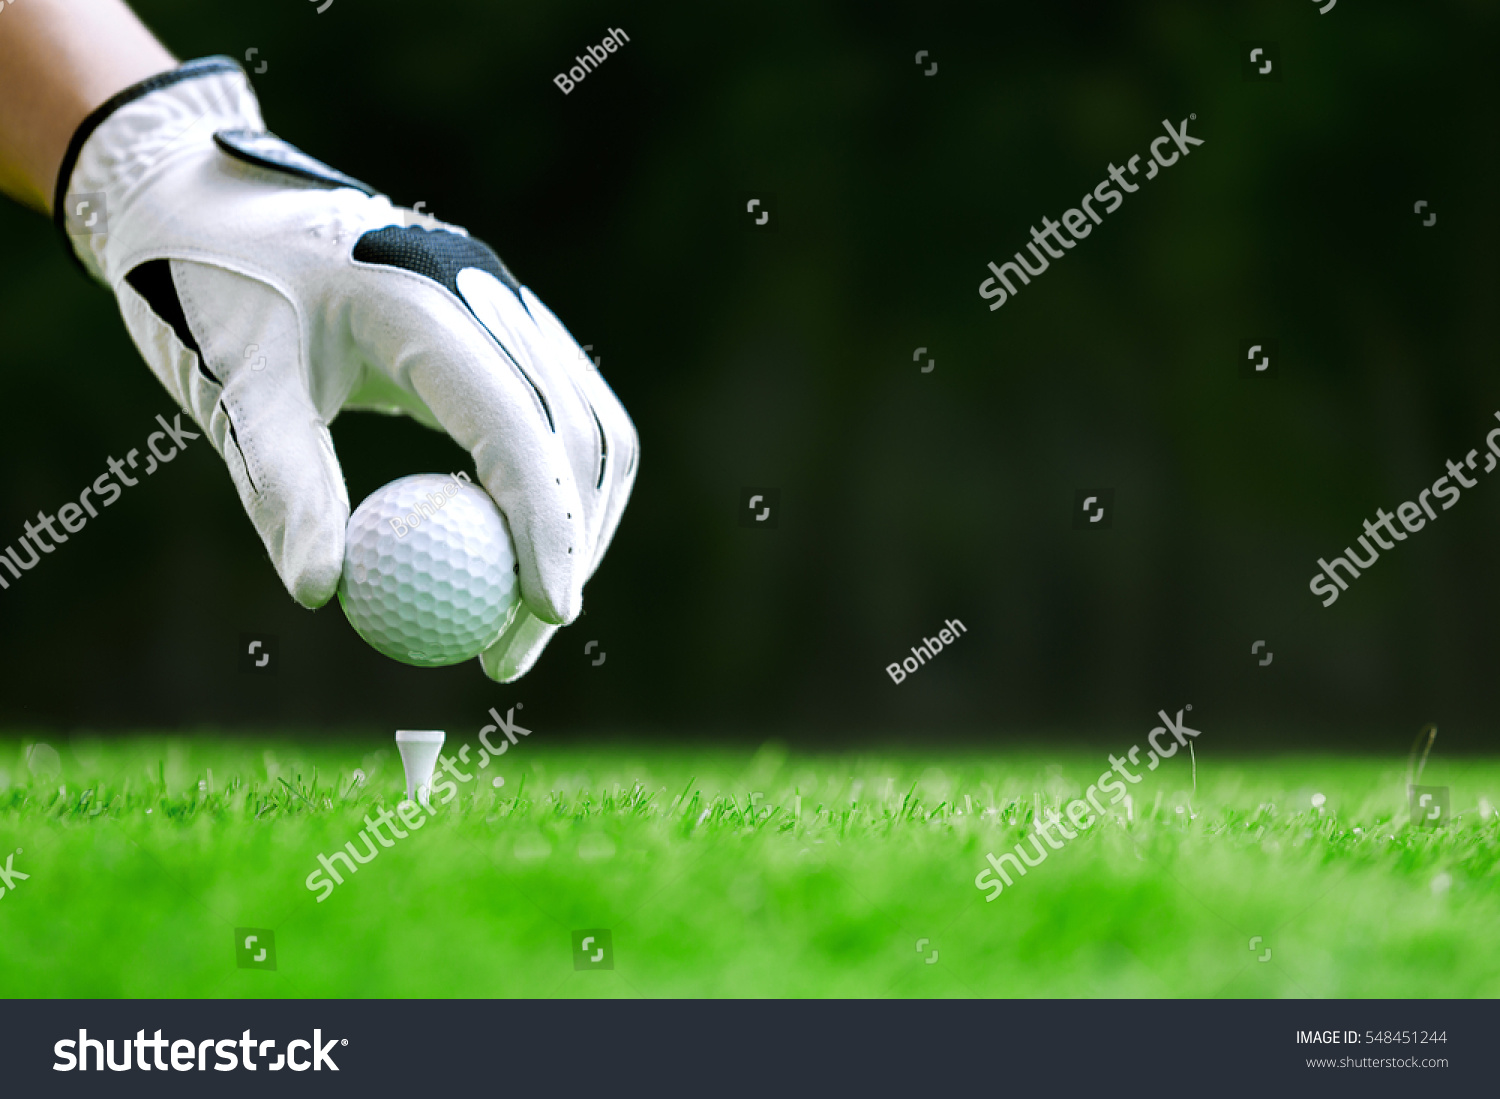 Hand putting golf ball on tee in golf course #548451244